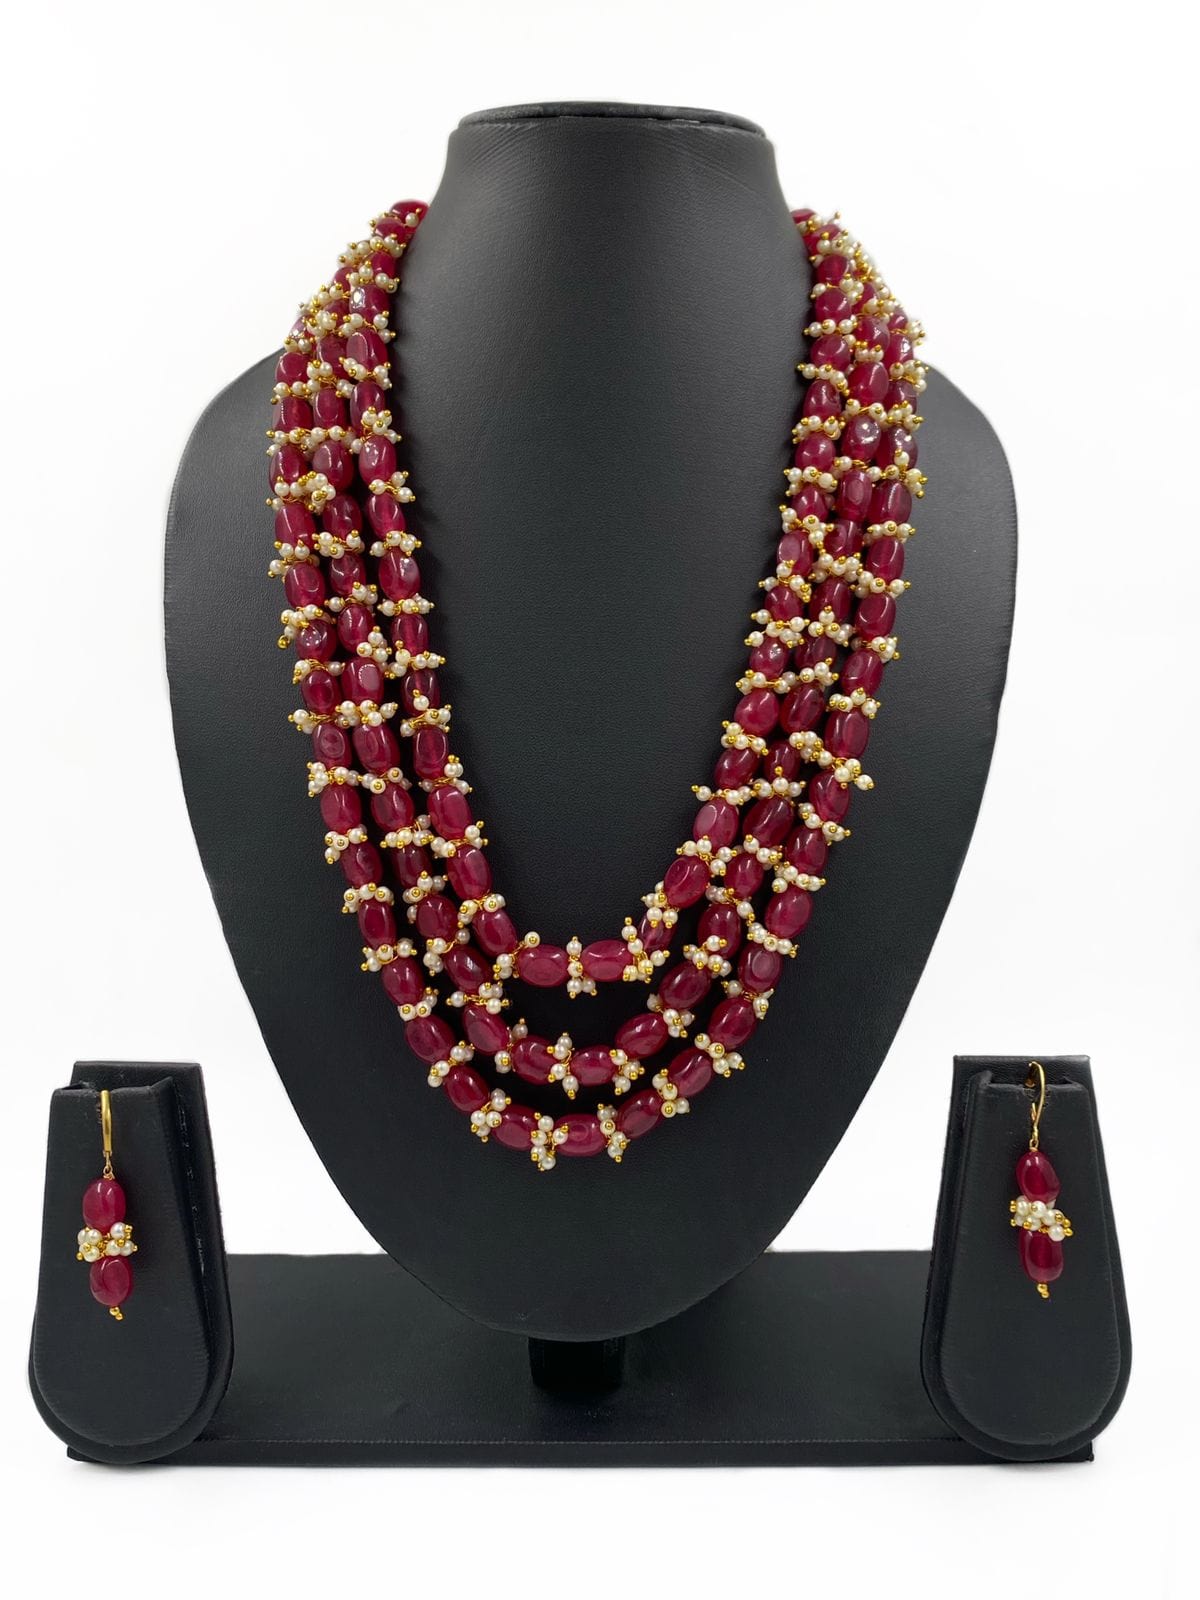 Semi Precious Layered Maroon Jade And Pearls Beads Necklace By Gehna Shop Beads Jewellery